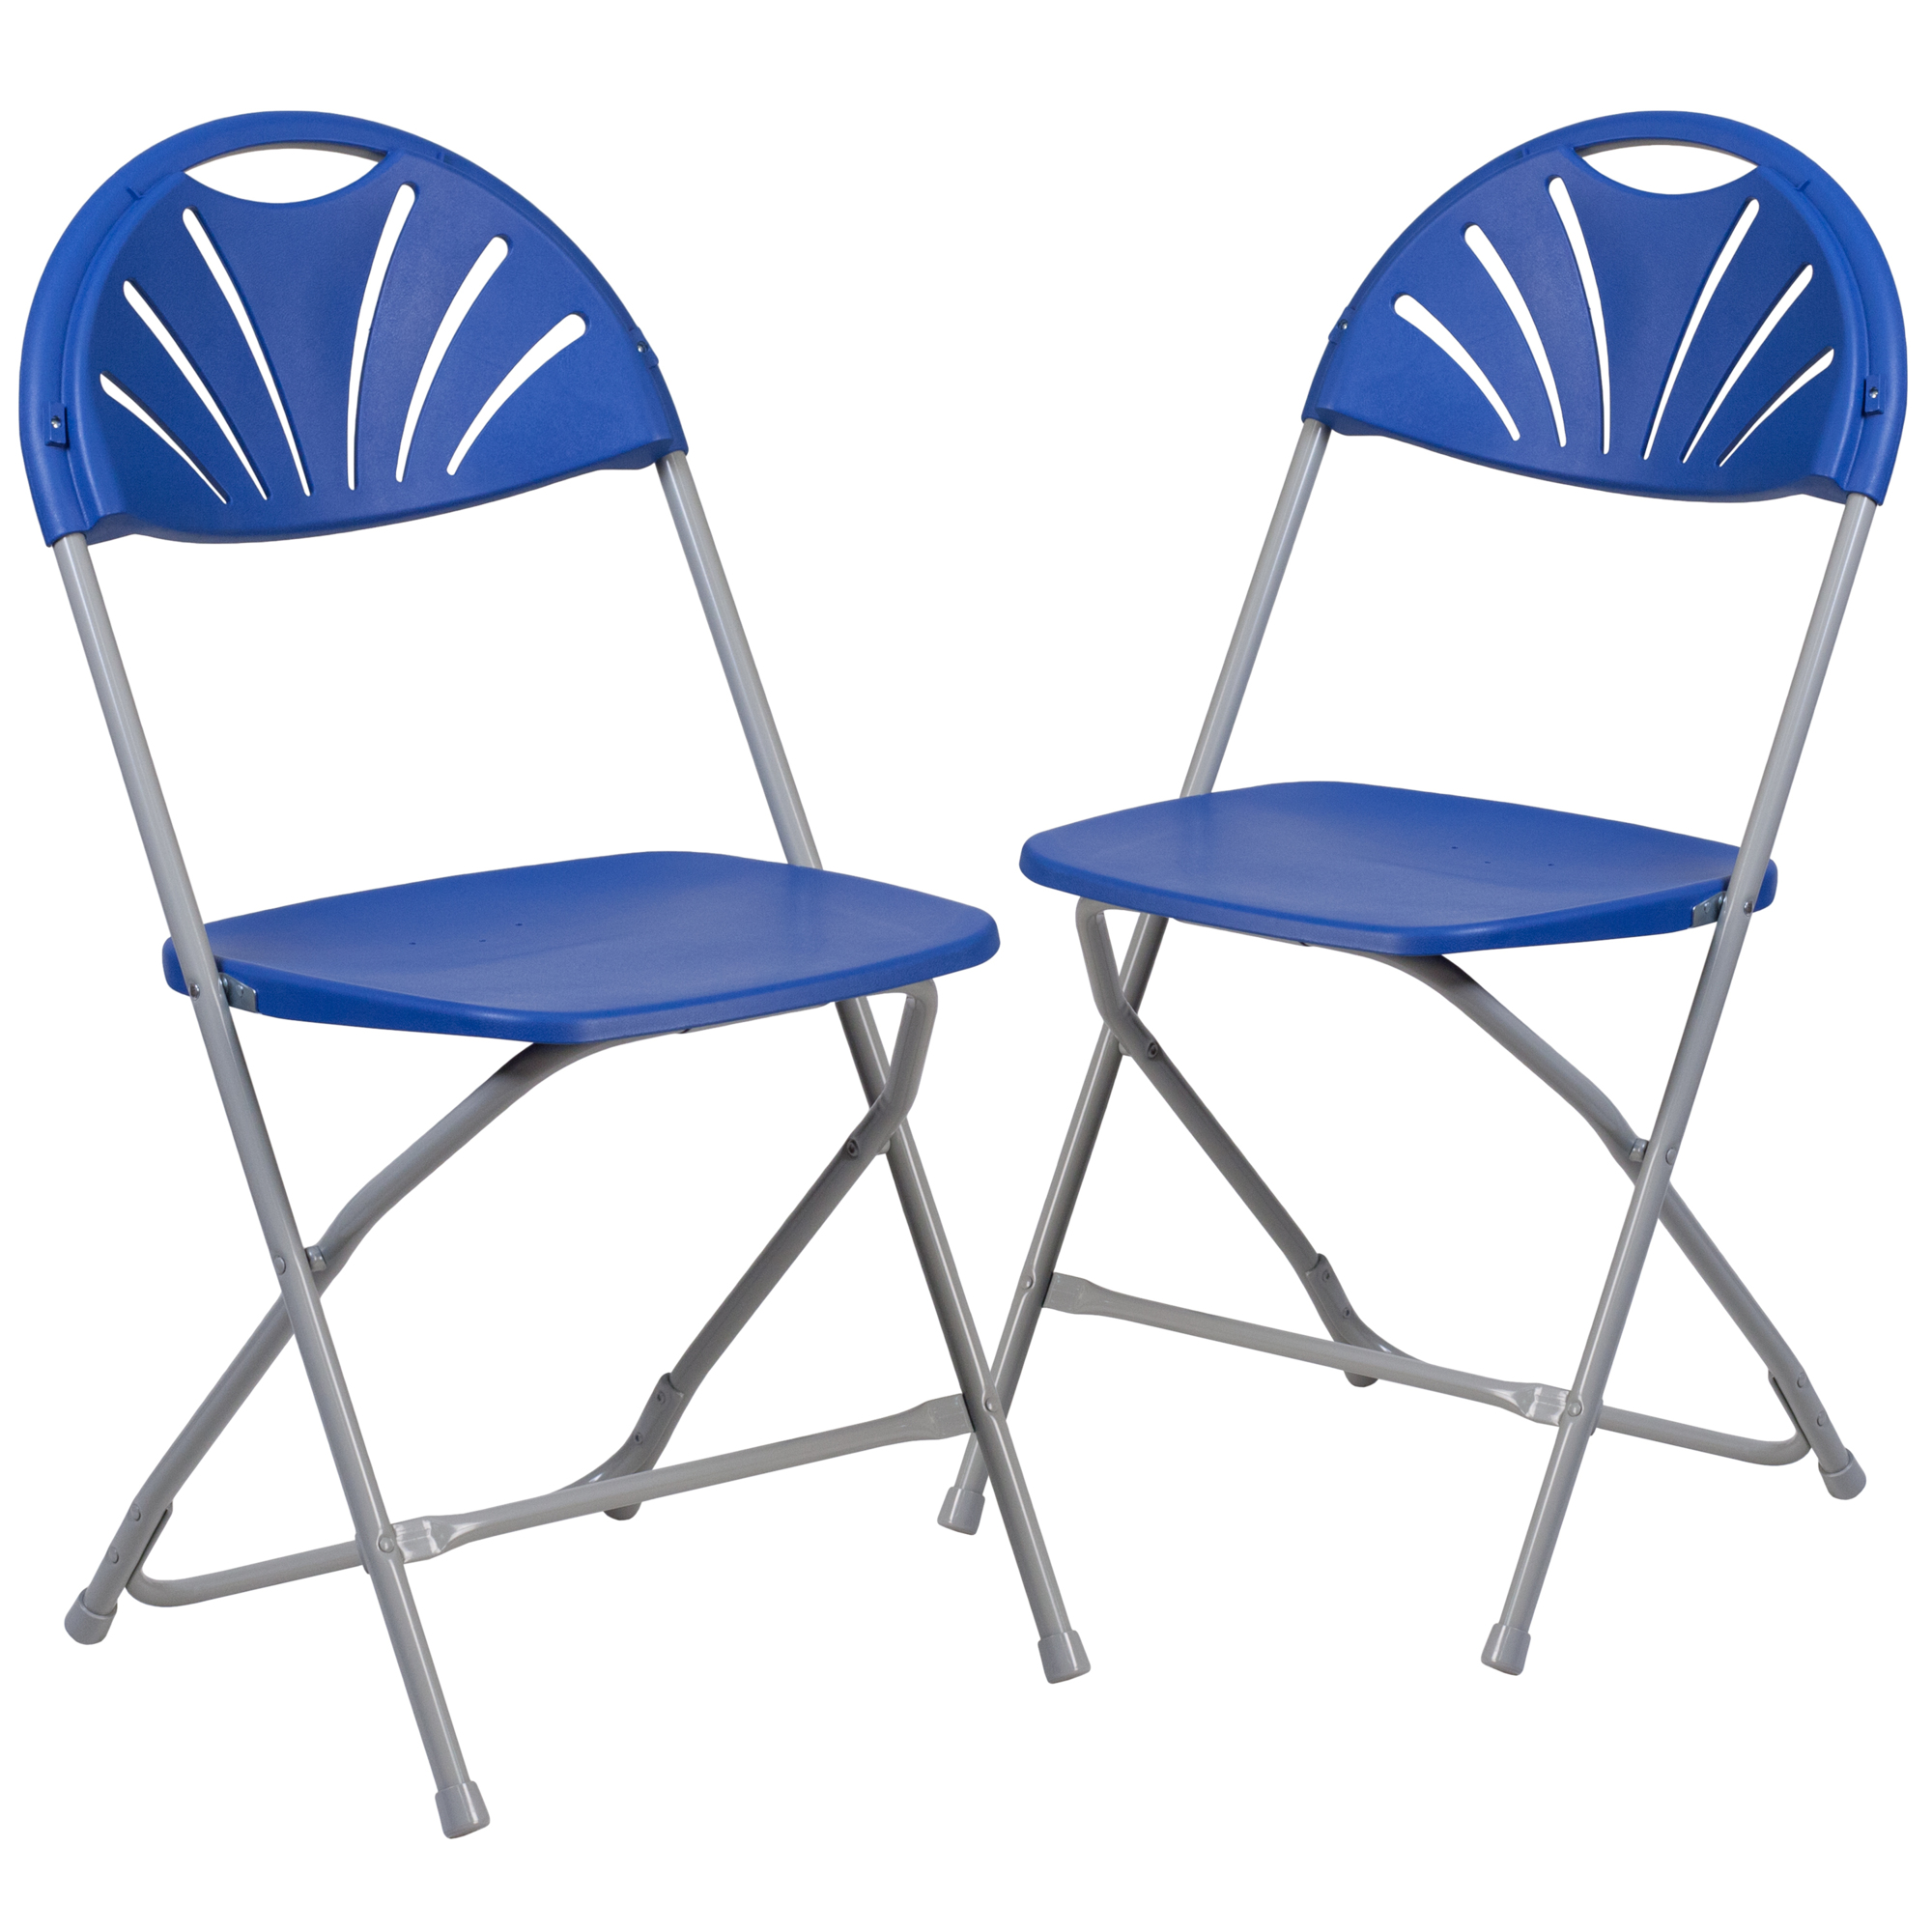 Flash Furniture, 650 lb. Rated Blue Plastic Fan Back Folding Chair, Primary Color Blue, Included (qty.) 2, Model 2LEL4BL